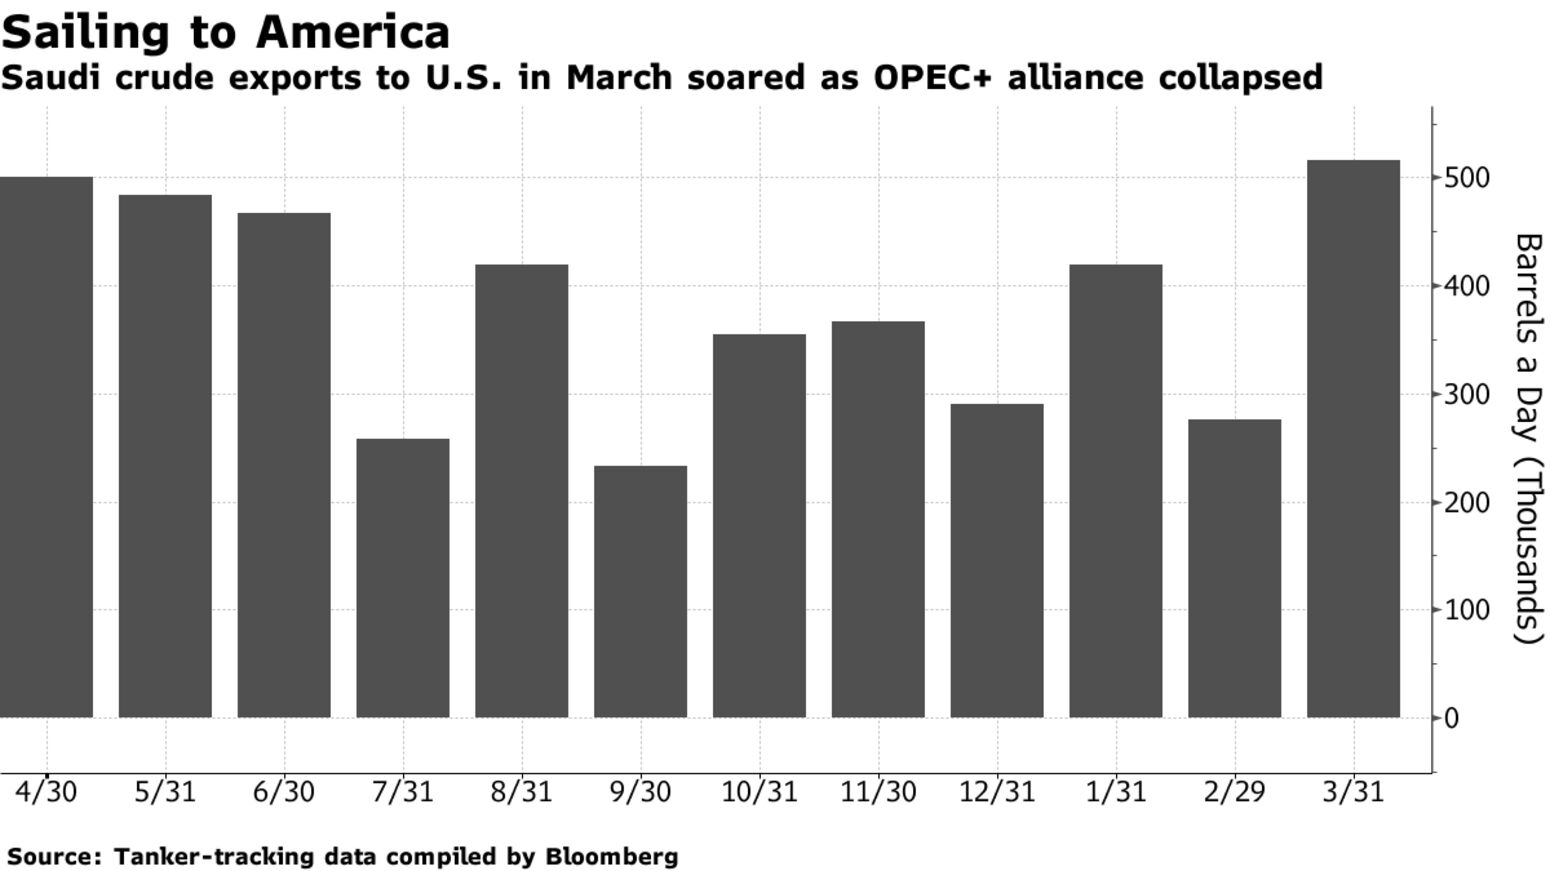 Saudi crude exports to U.S. in March soared as OPEC+ alliance collapsed